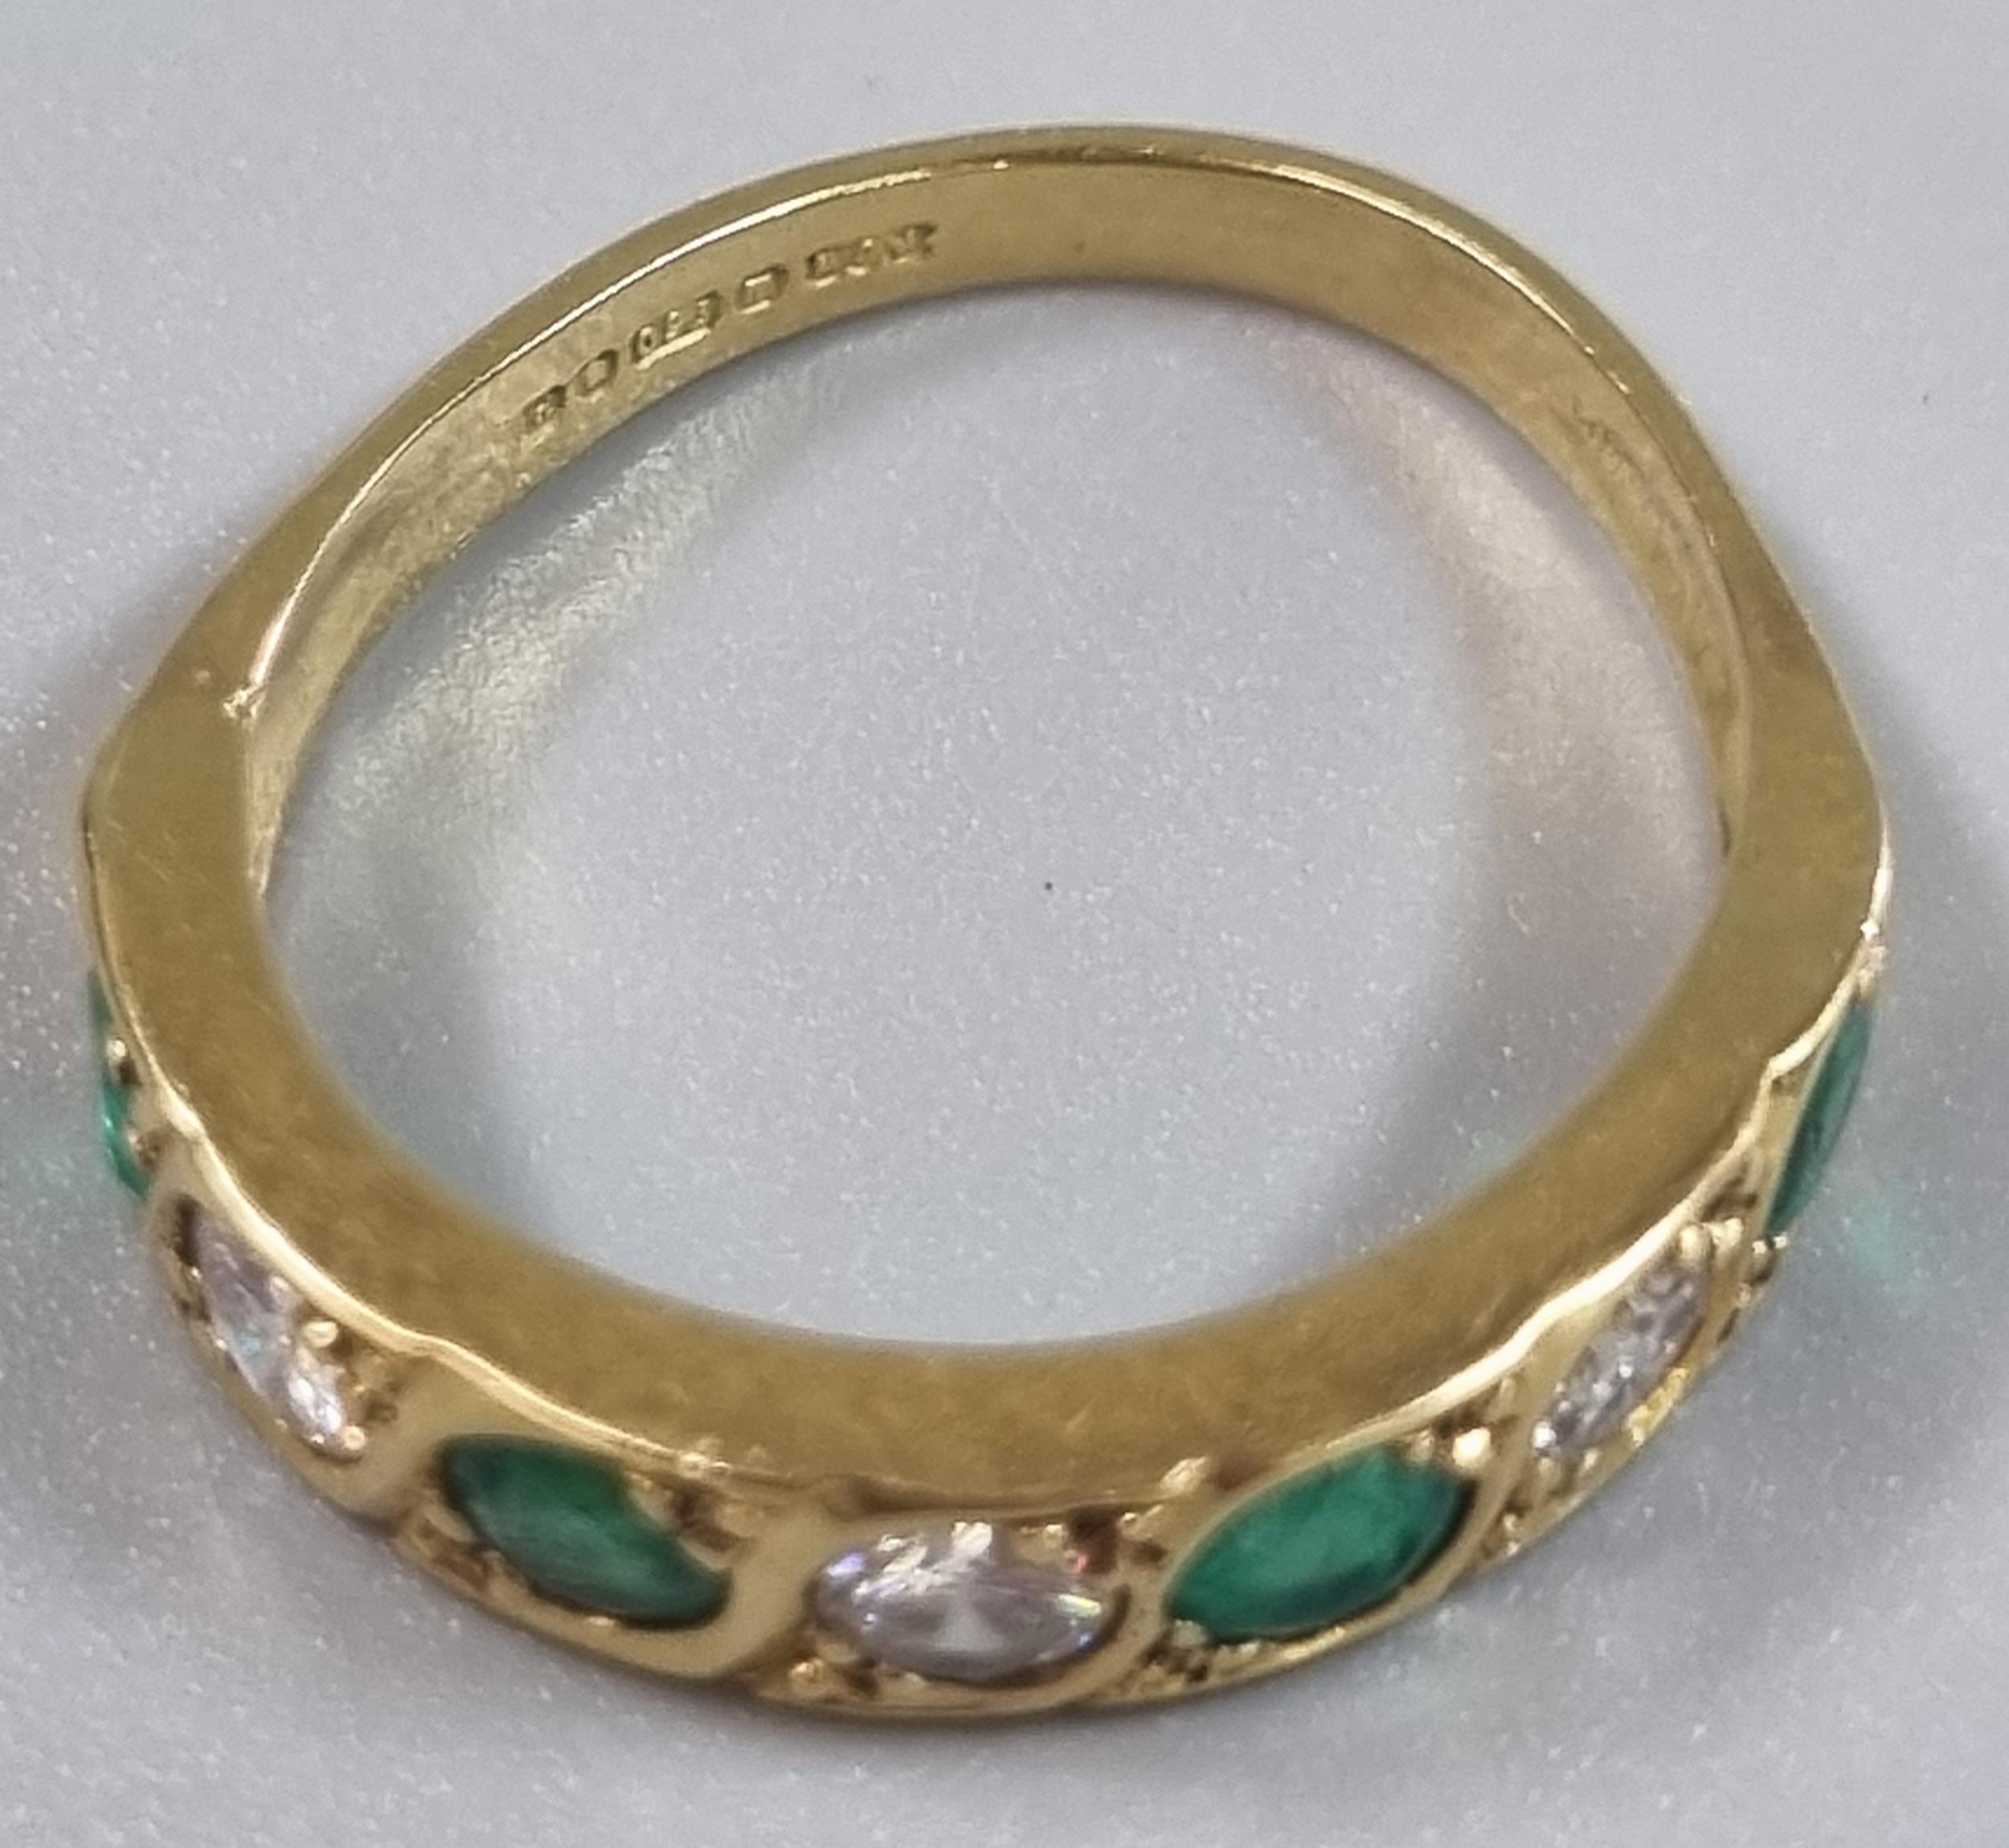 18ct gold diamond and emerald seven stone ring. 3g approx. Size J. (B.P. 21% + VAT) - Image 3 of 4